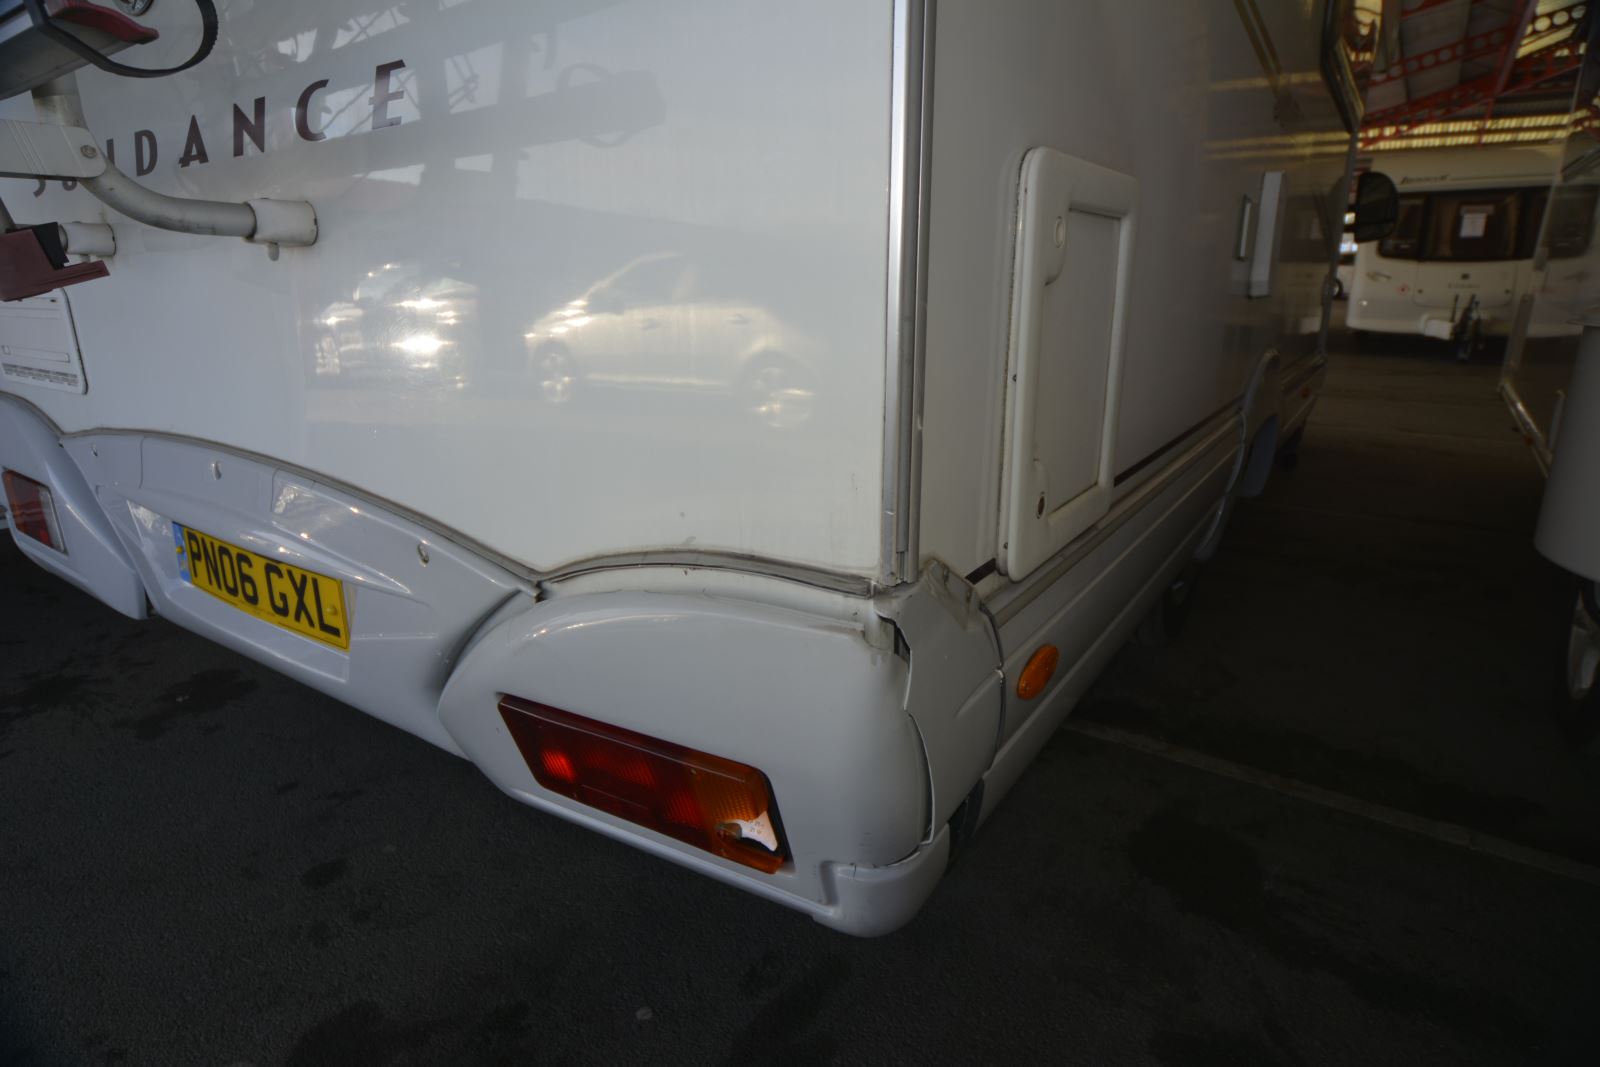 Check the exterior of the used motorhome for any damage